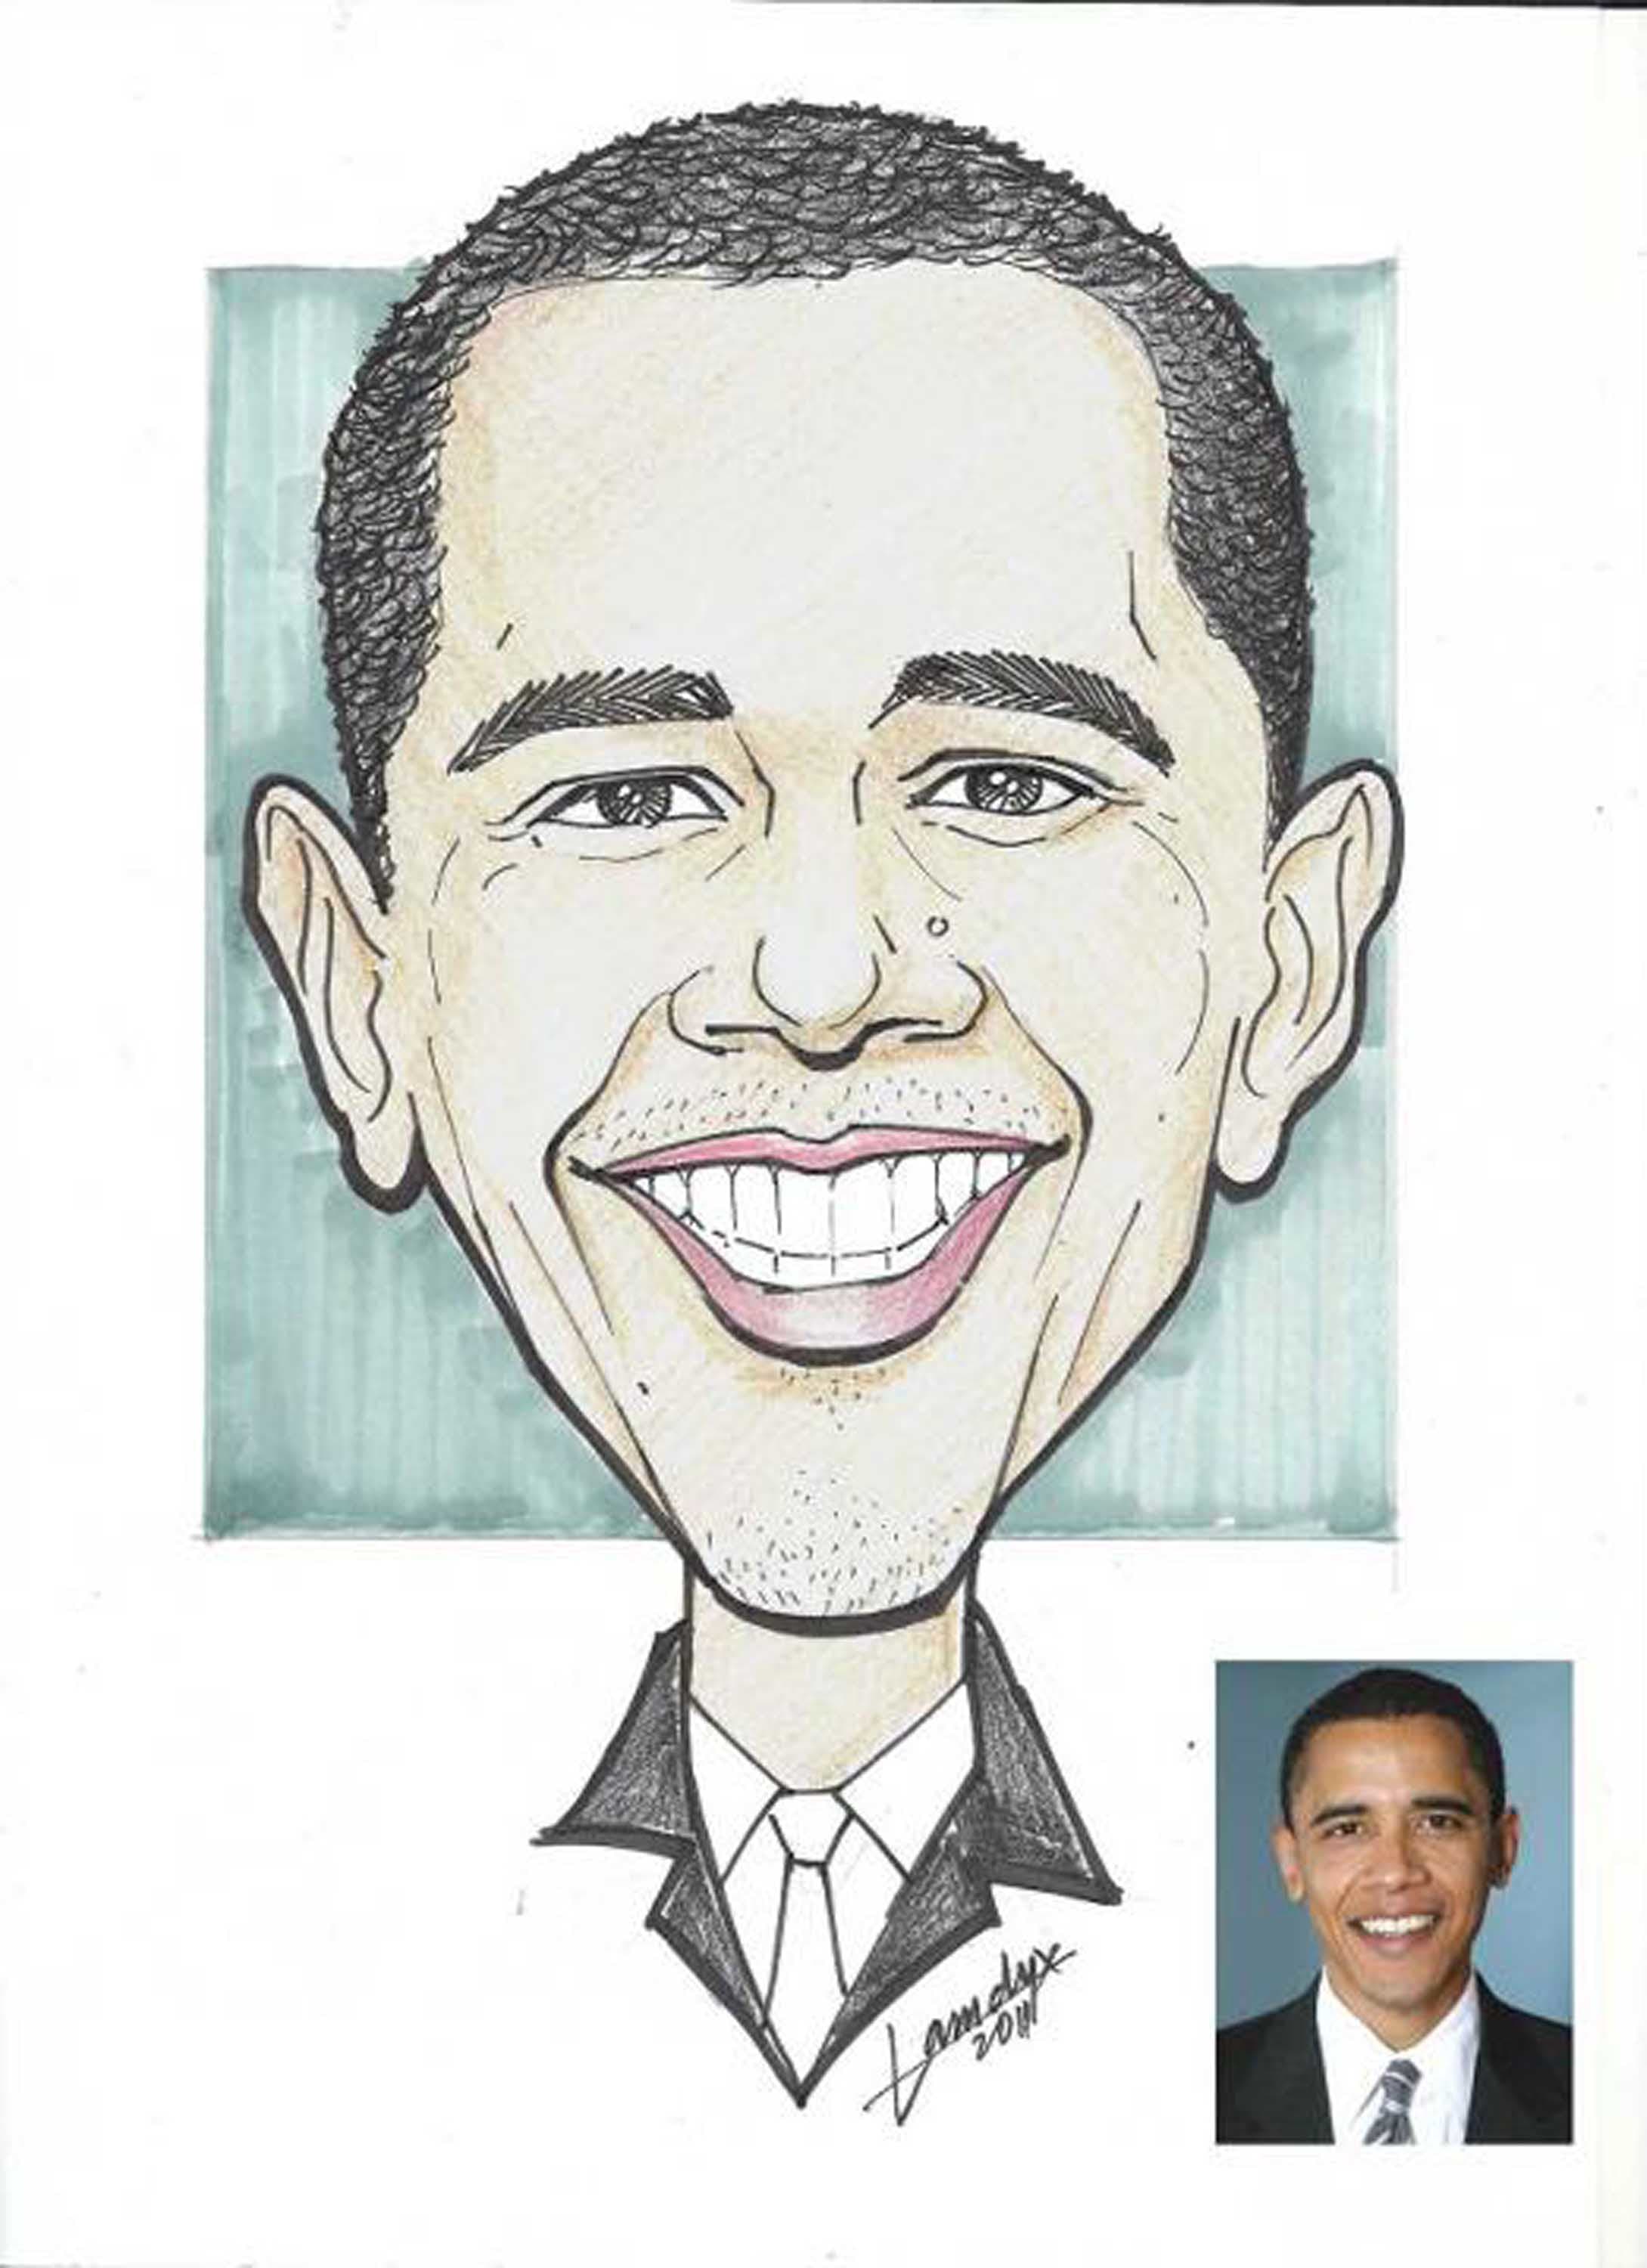 How To Draw A Caricature From A Photo / Can always be corrected by